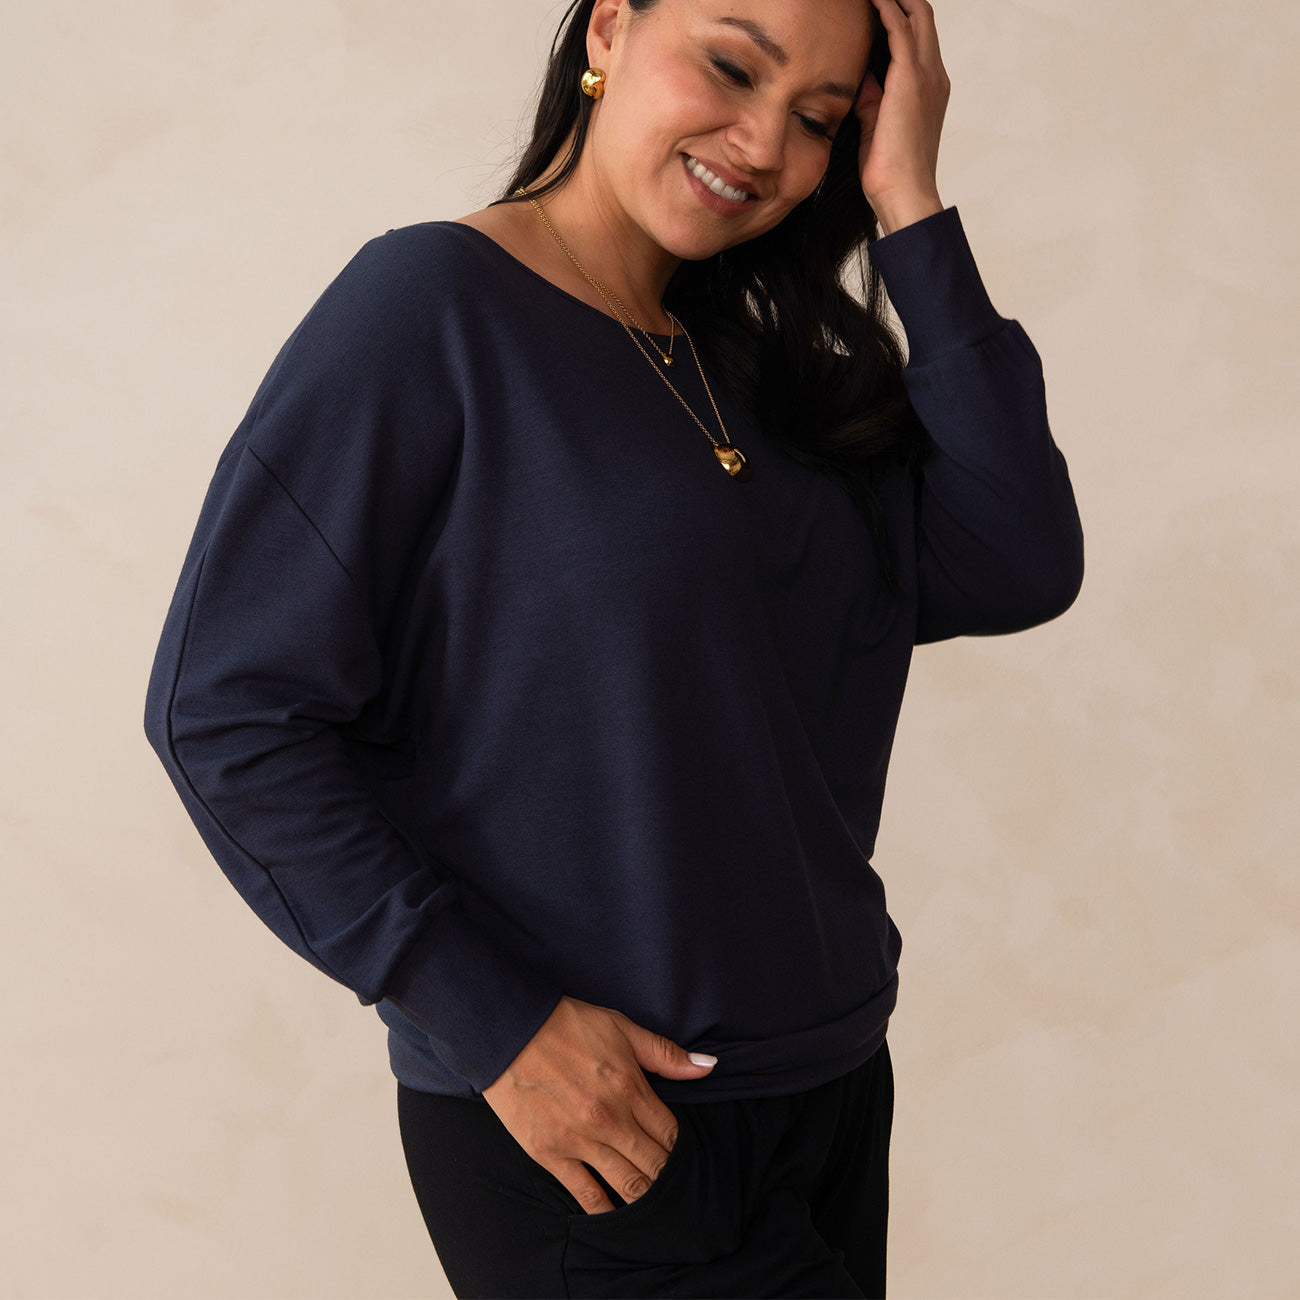 Dressy Sweatshirt | Shop Sustainable, Ethical Clothing for Women Navy Blue / XS/S